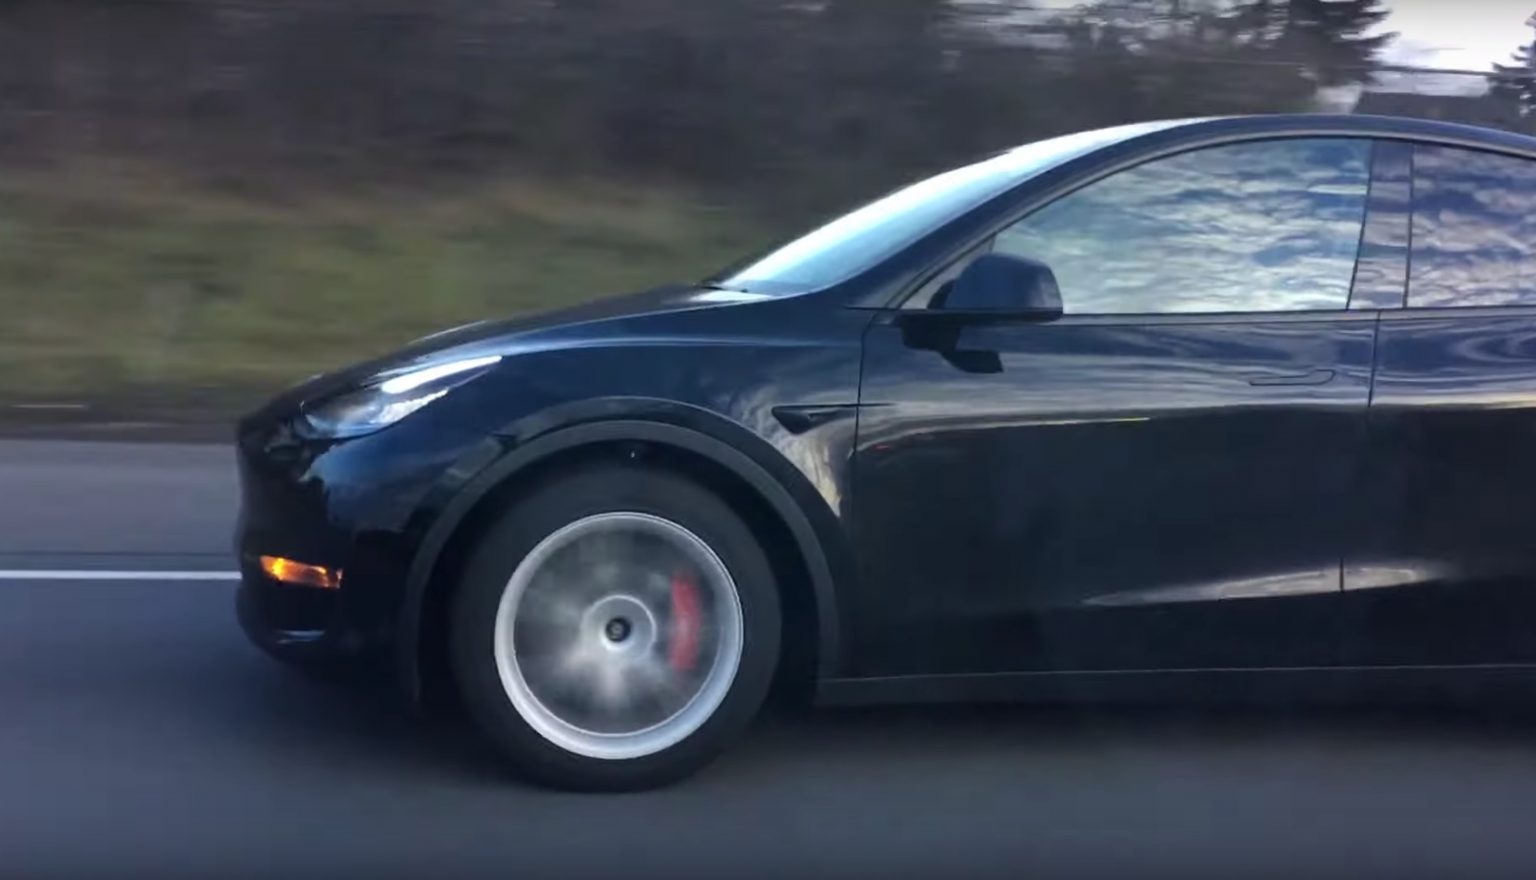 Tesla Model Y tire sizes for Long Range and Performance leaks on Tire Rack